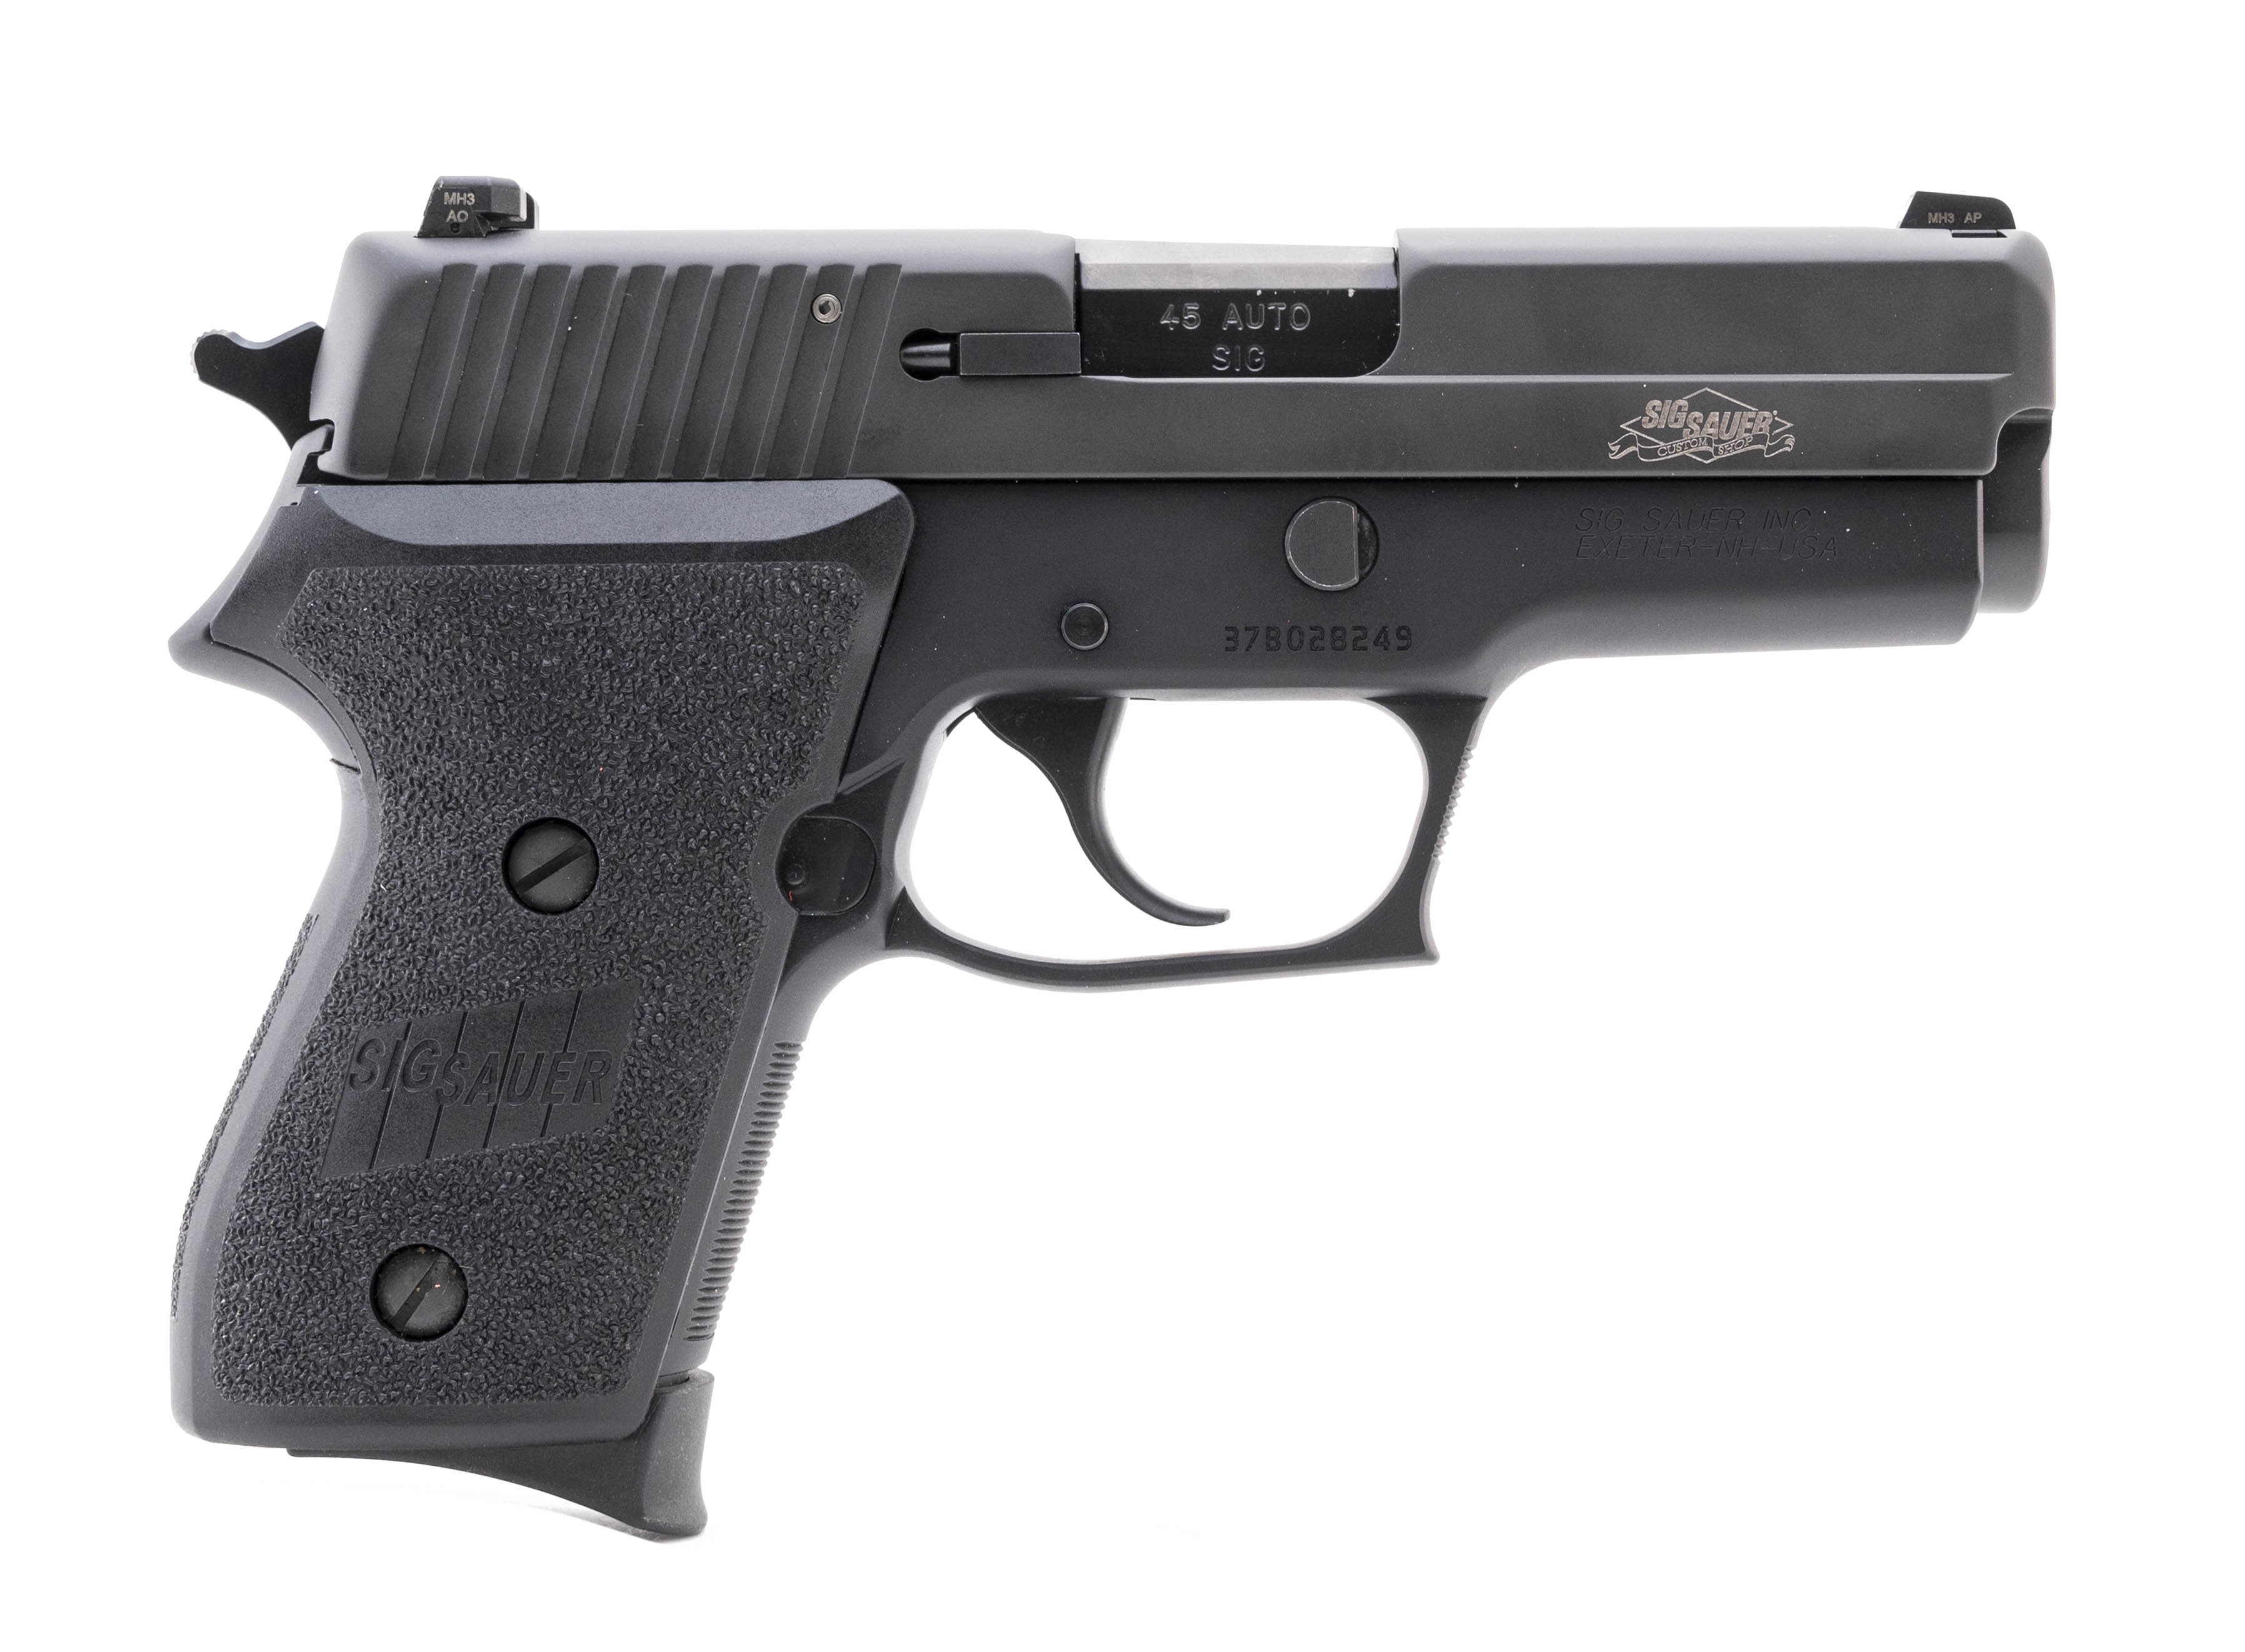 Sig Sauer P220 Price - How do you Price a Switches?